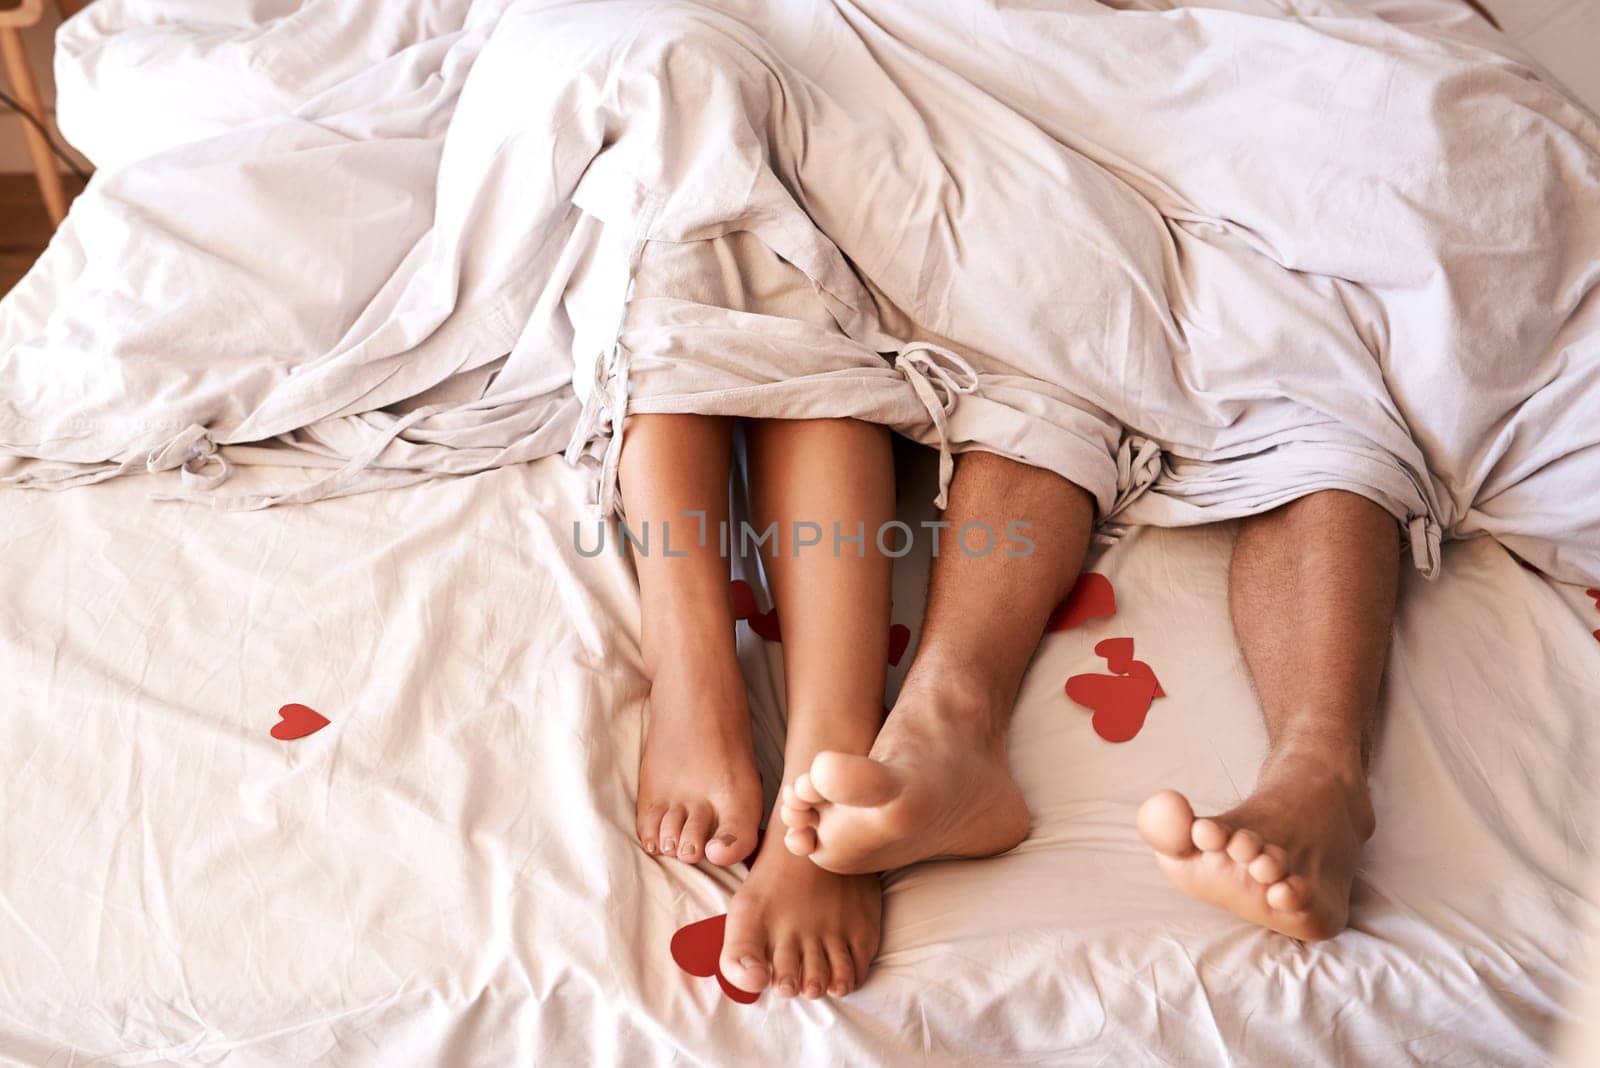 Bed, legs and couple with Valentines Day heart, romance or emoji icon for home love, intimacy and honeymoon affection. Marriage bond, relax sleep and top view feet of people sleeping in hotel bedroom.